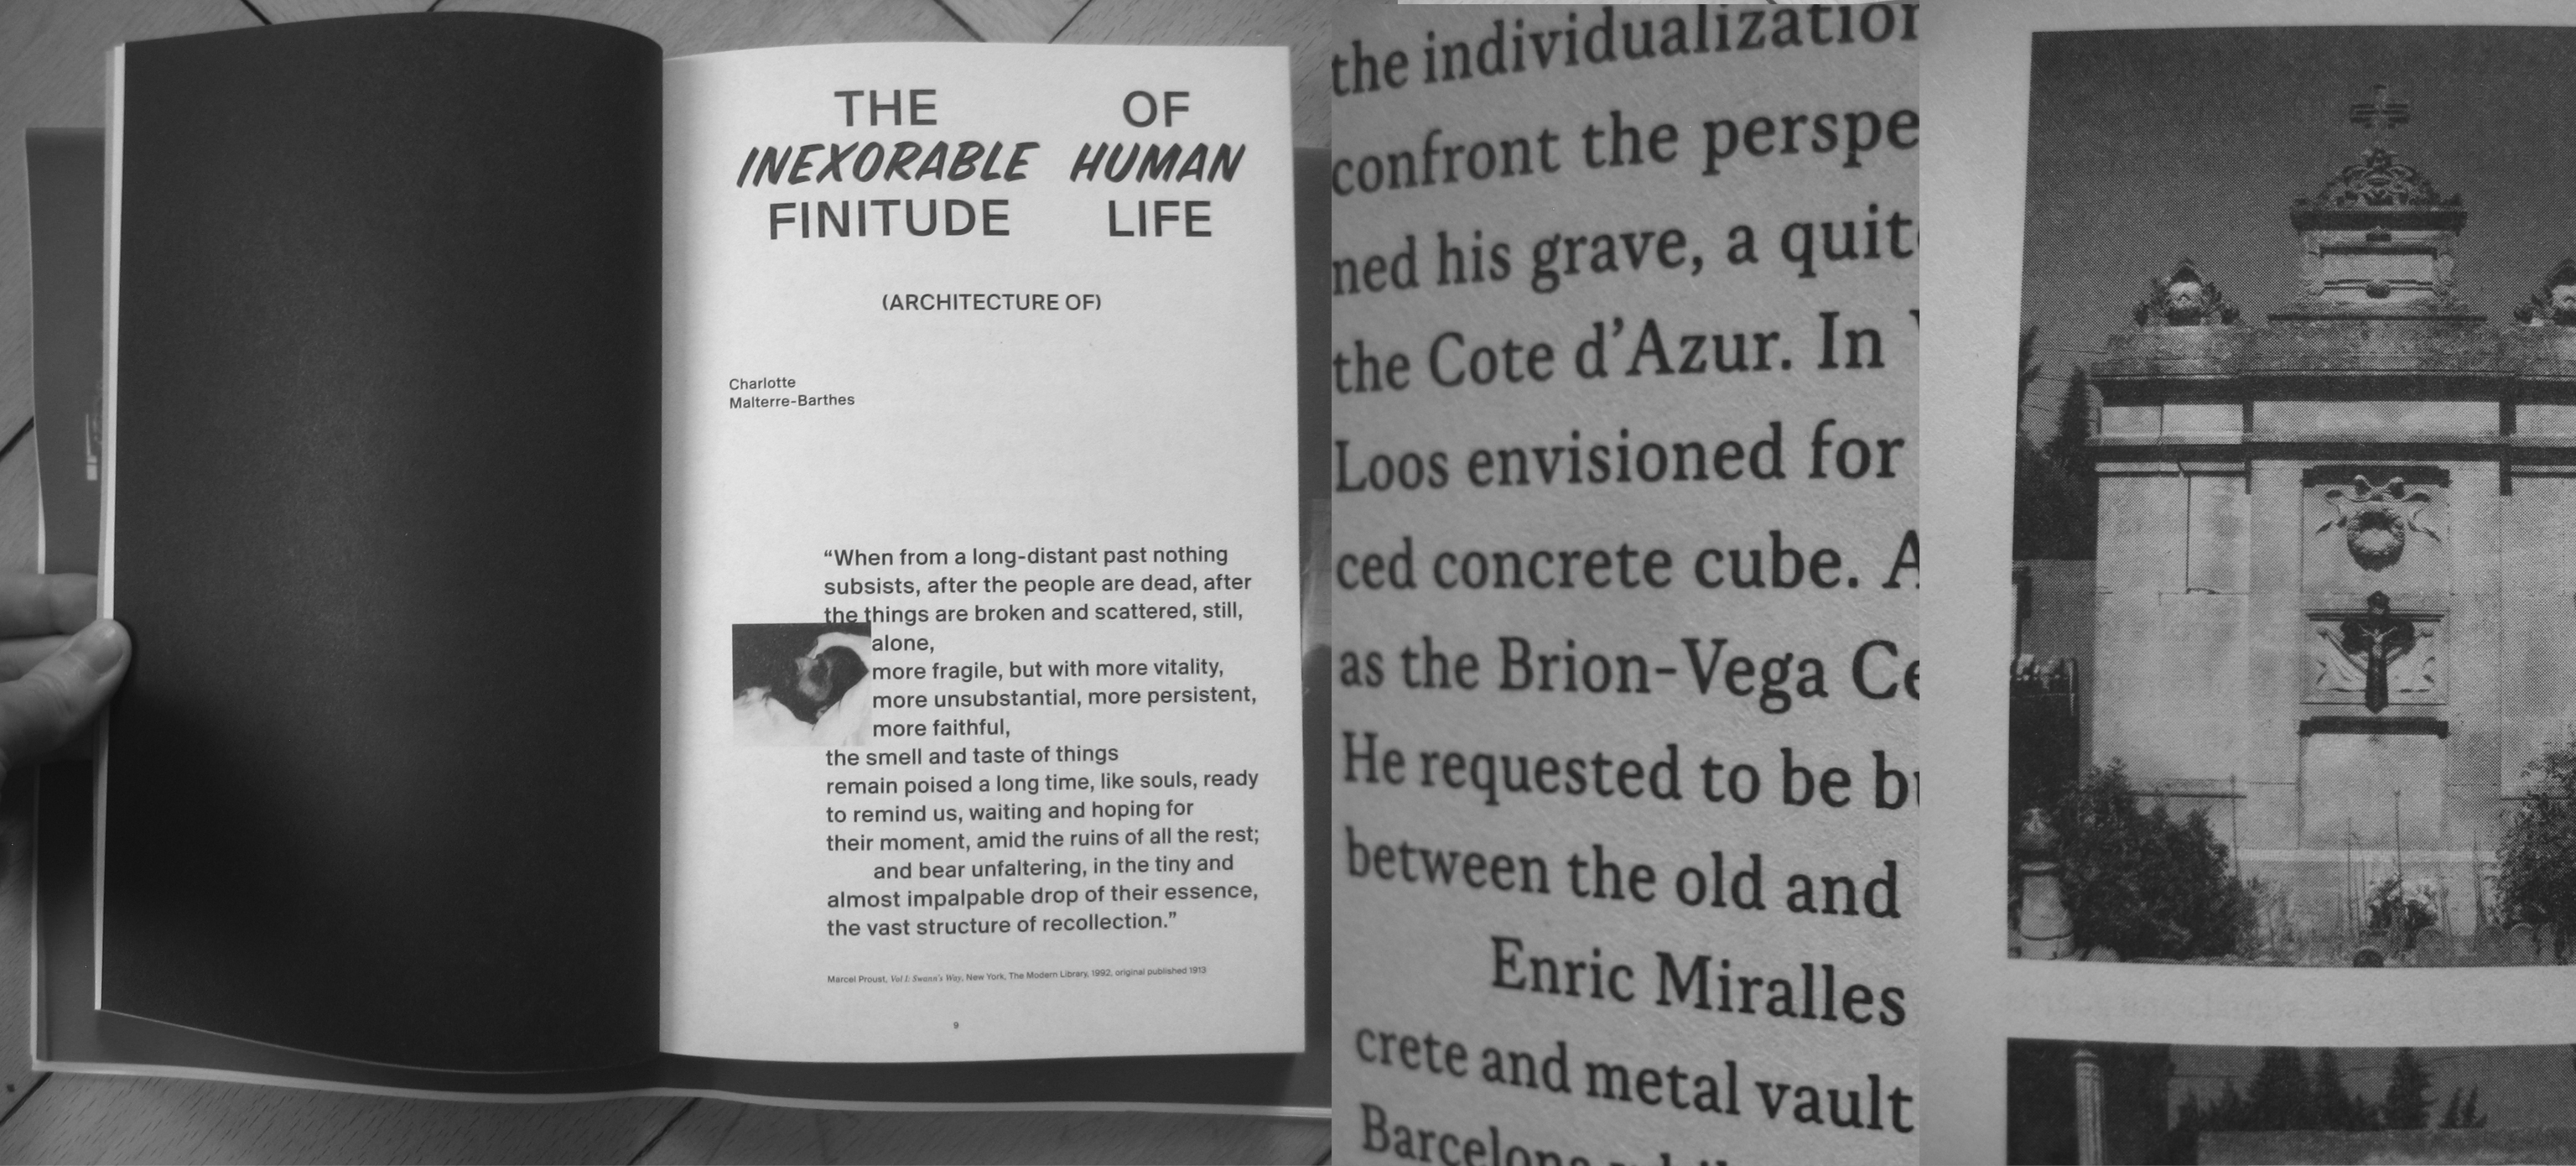 the inexorable finitude of human life (architecture of) published